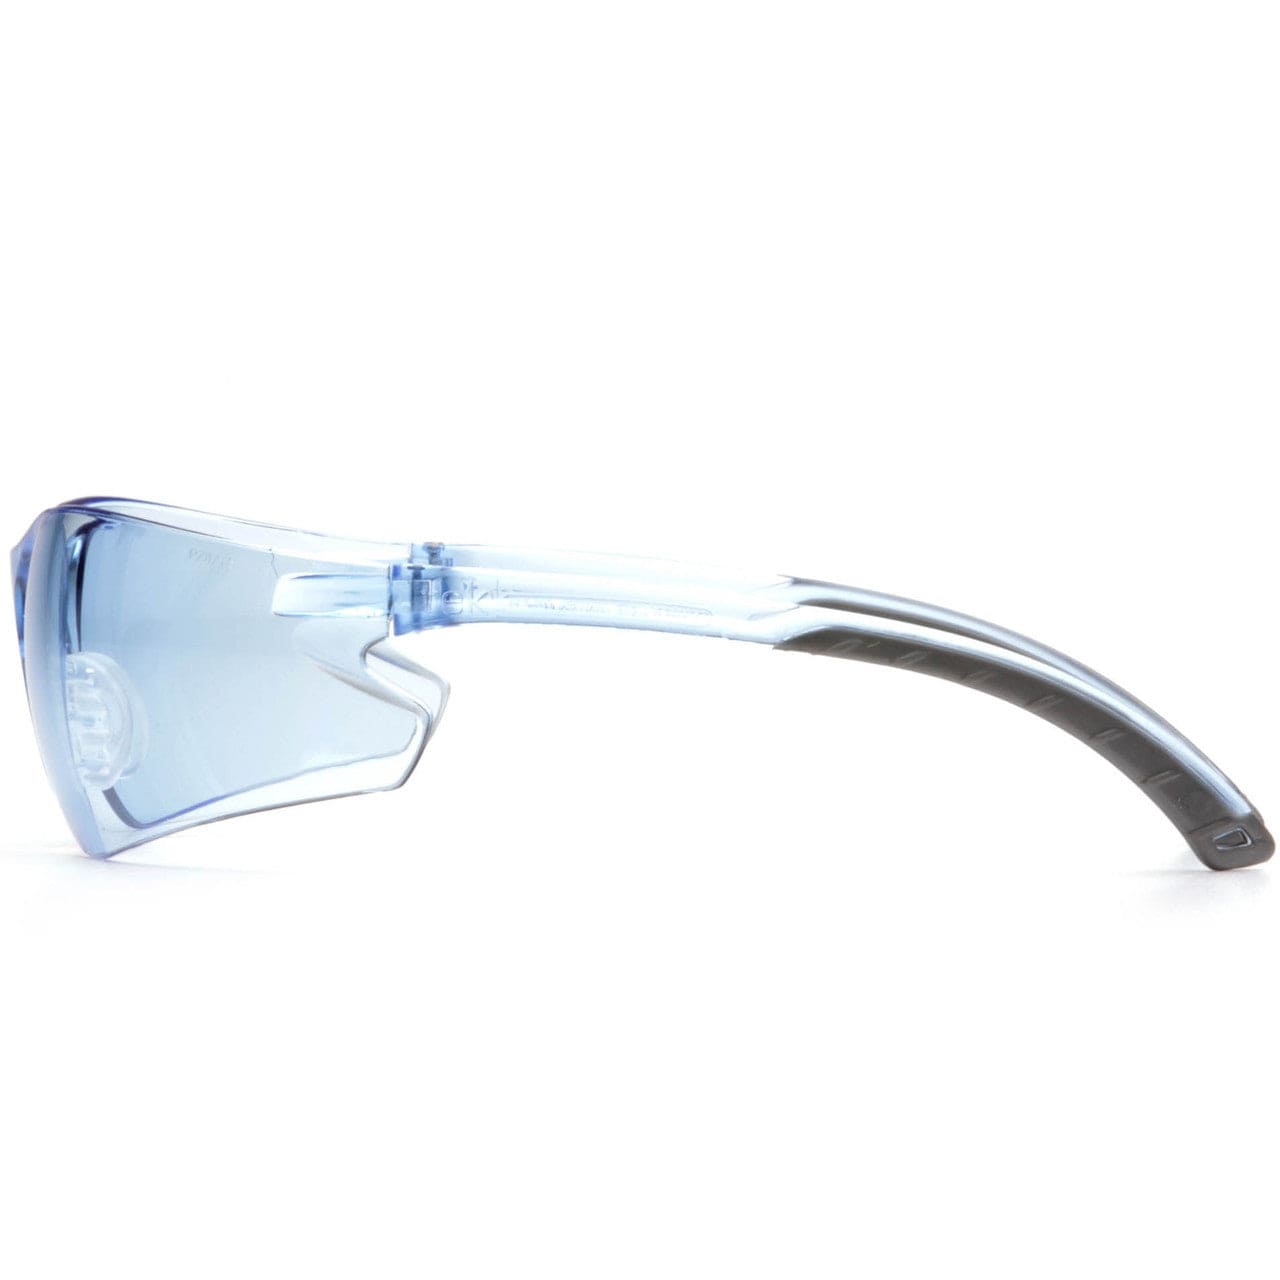 Pyramex Itek Safety Glasses with Infinity Blue Lens S5860S Side View